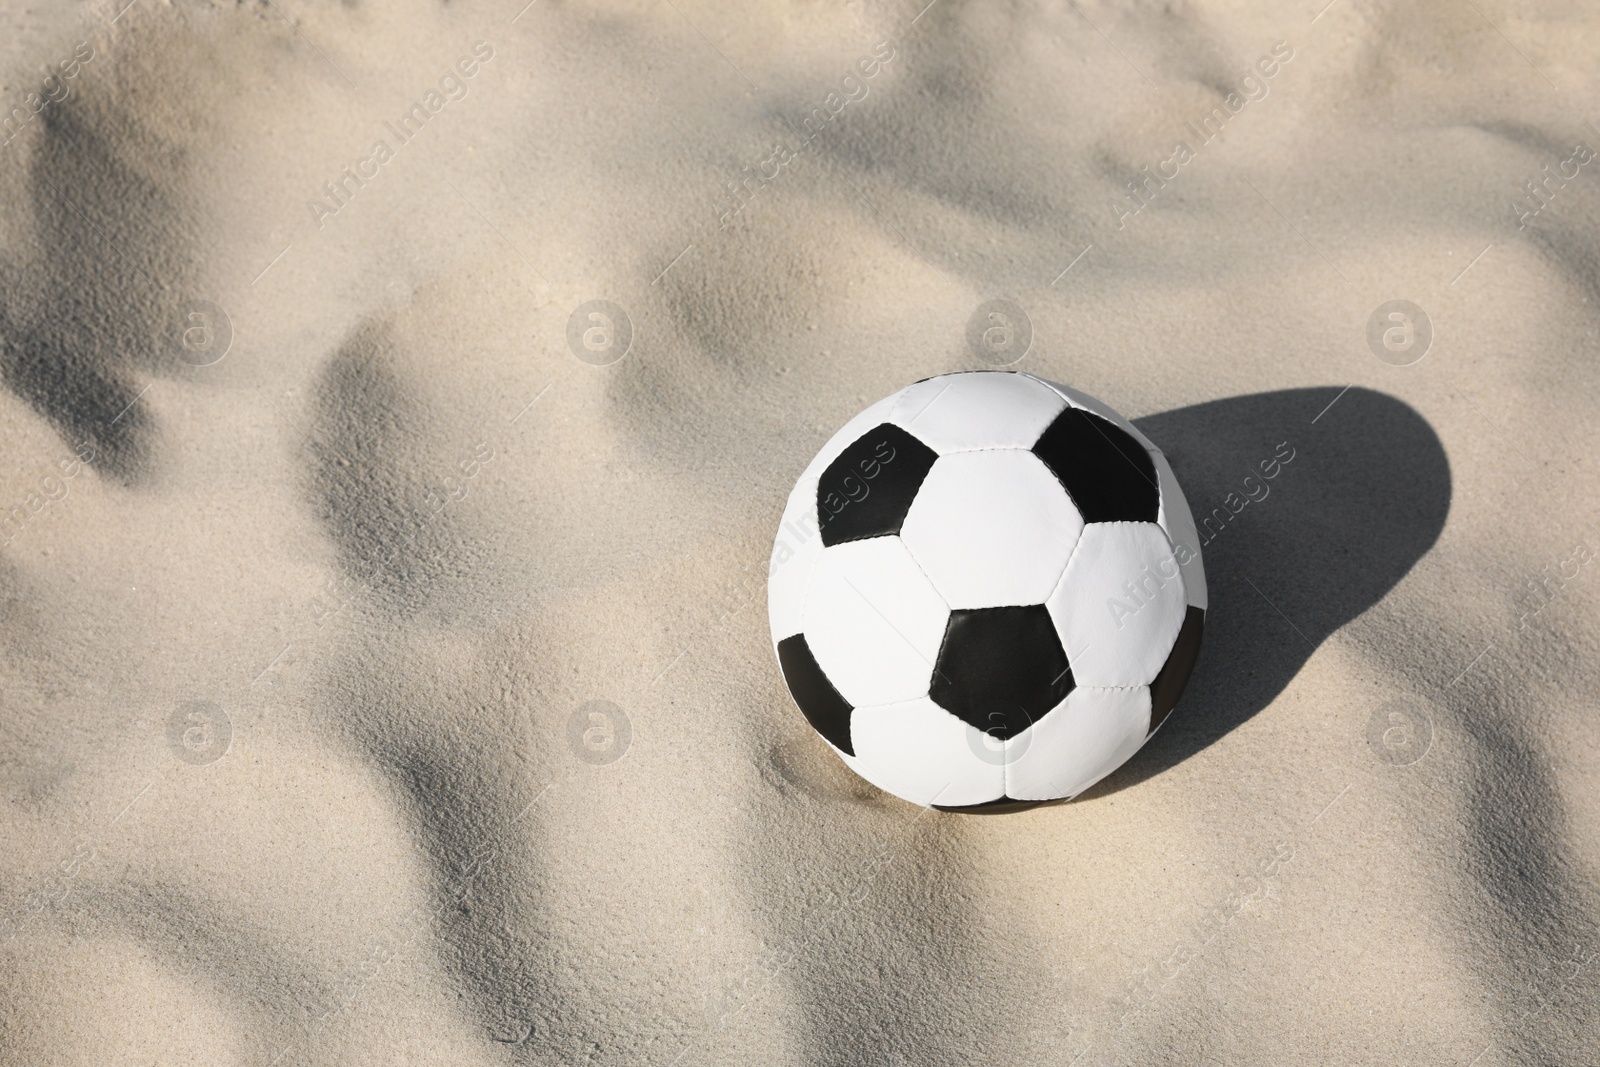 Photo of Soccer ball on sand, space for text. Football equipment